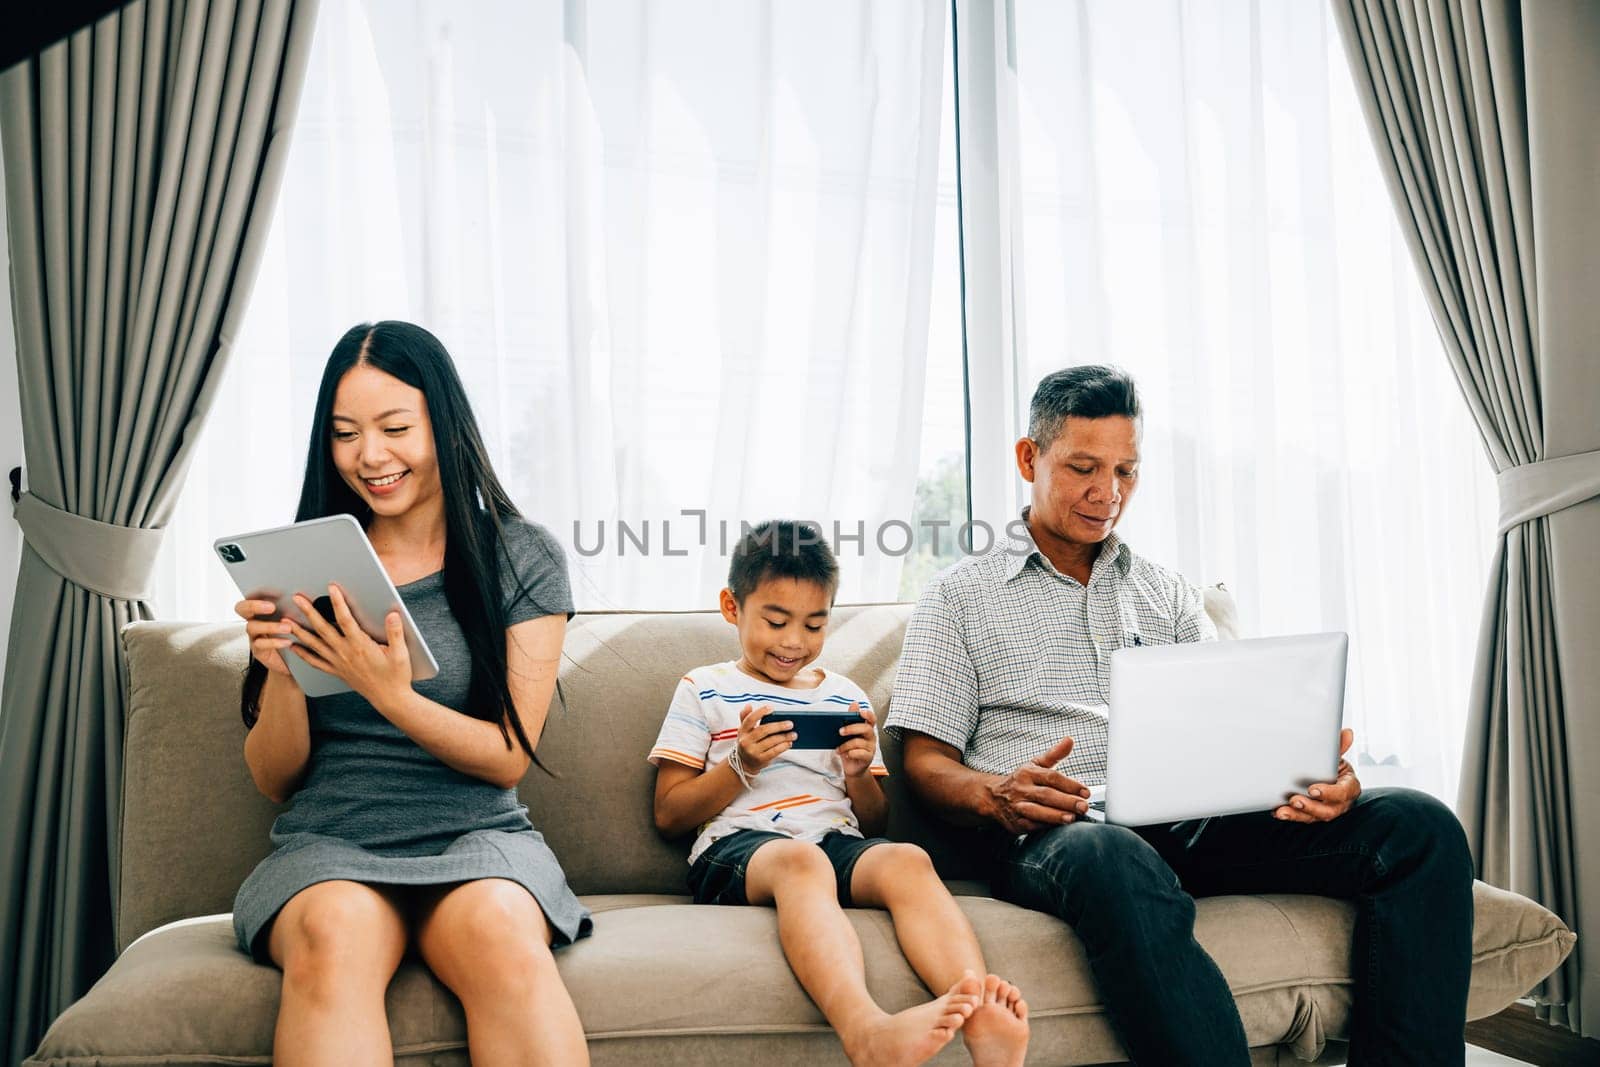 An Asian family engrossed in devices at home neglects bonding time by Sorapop